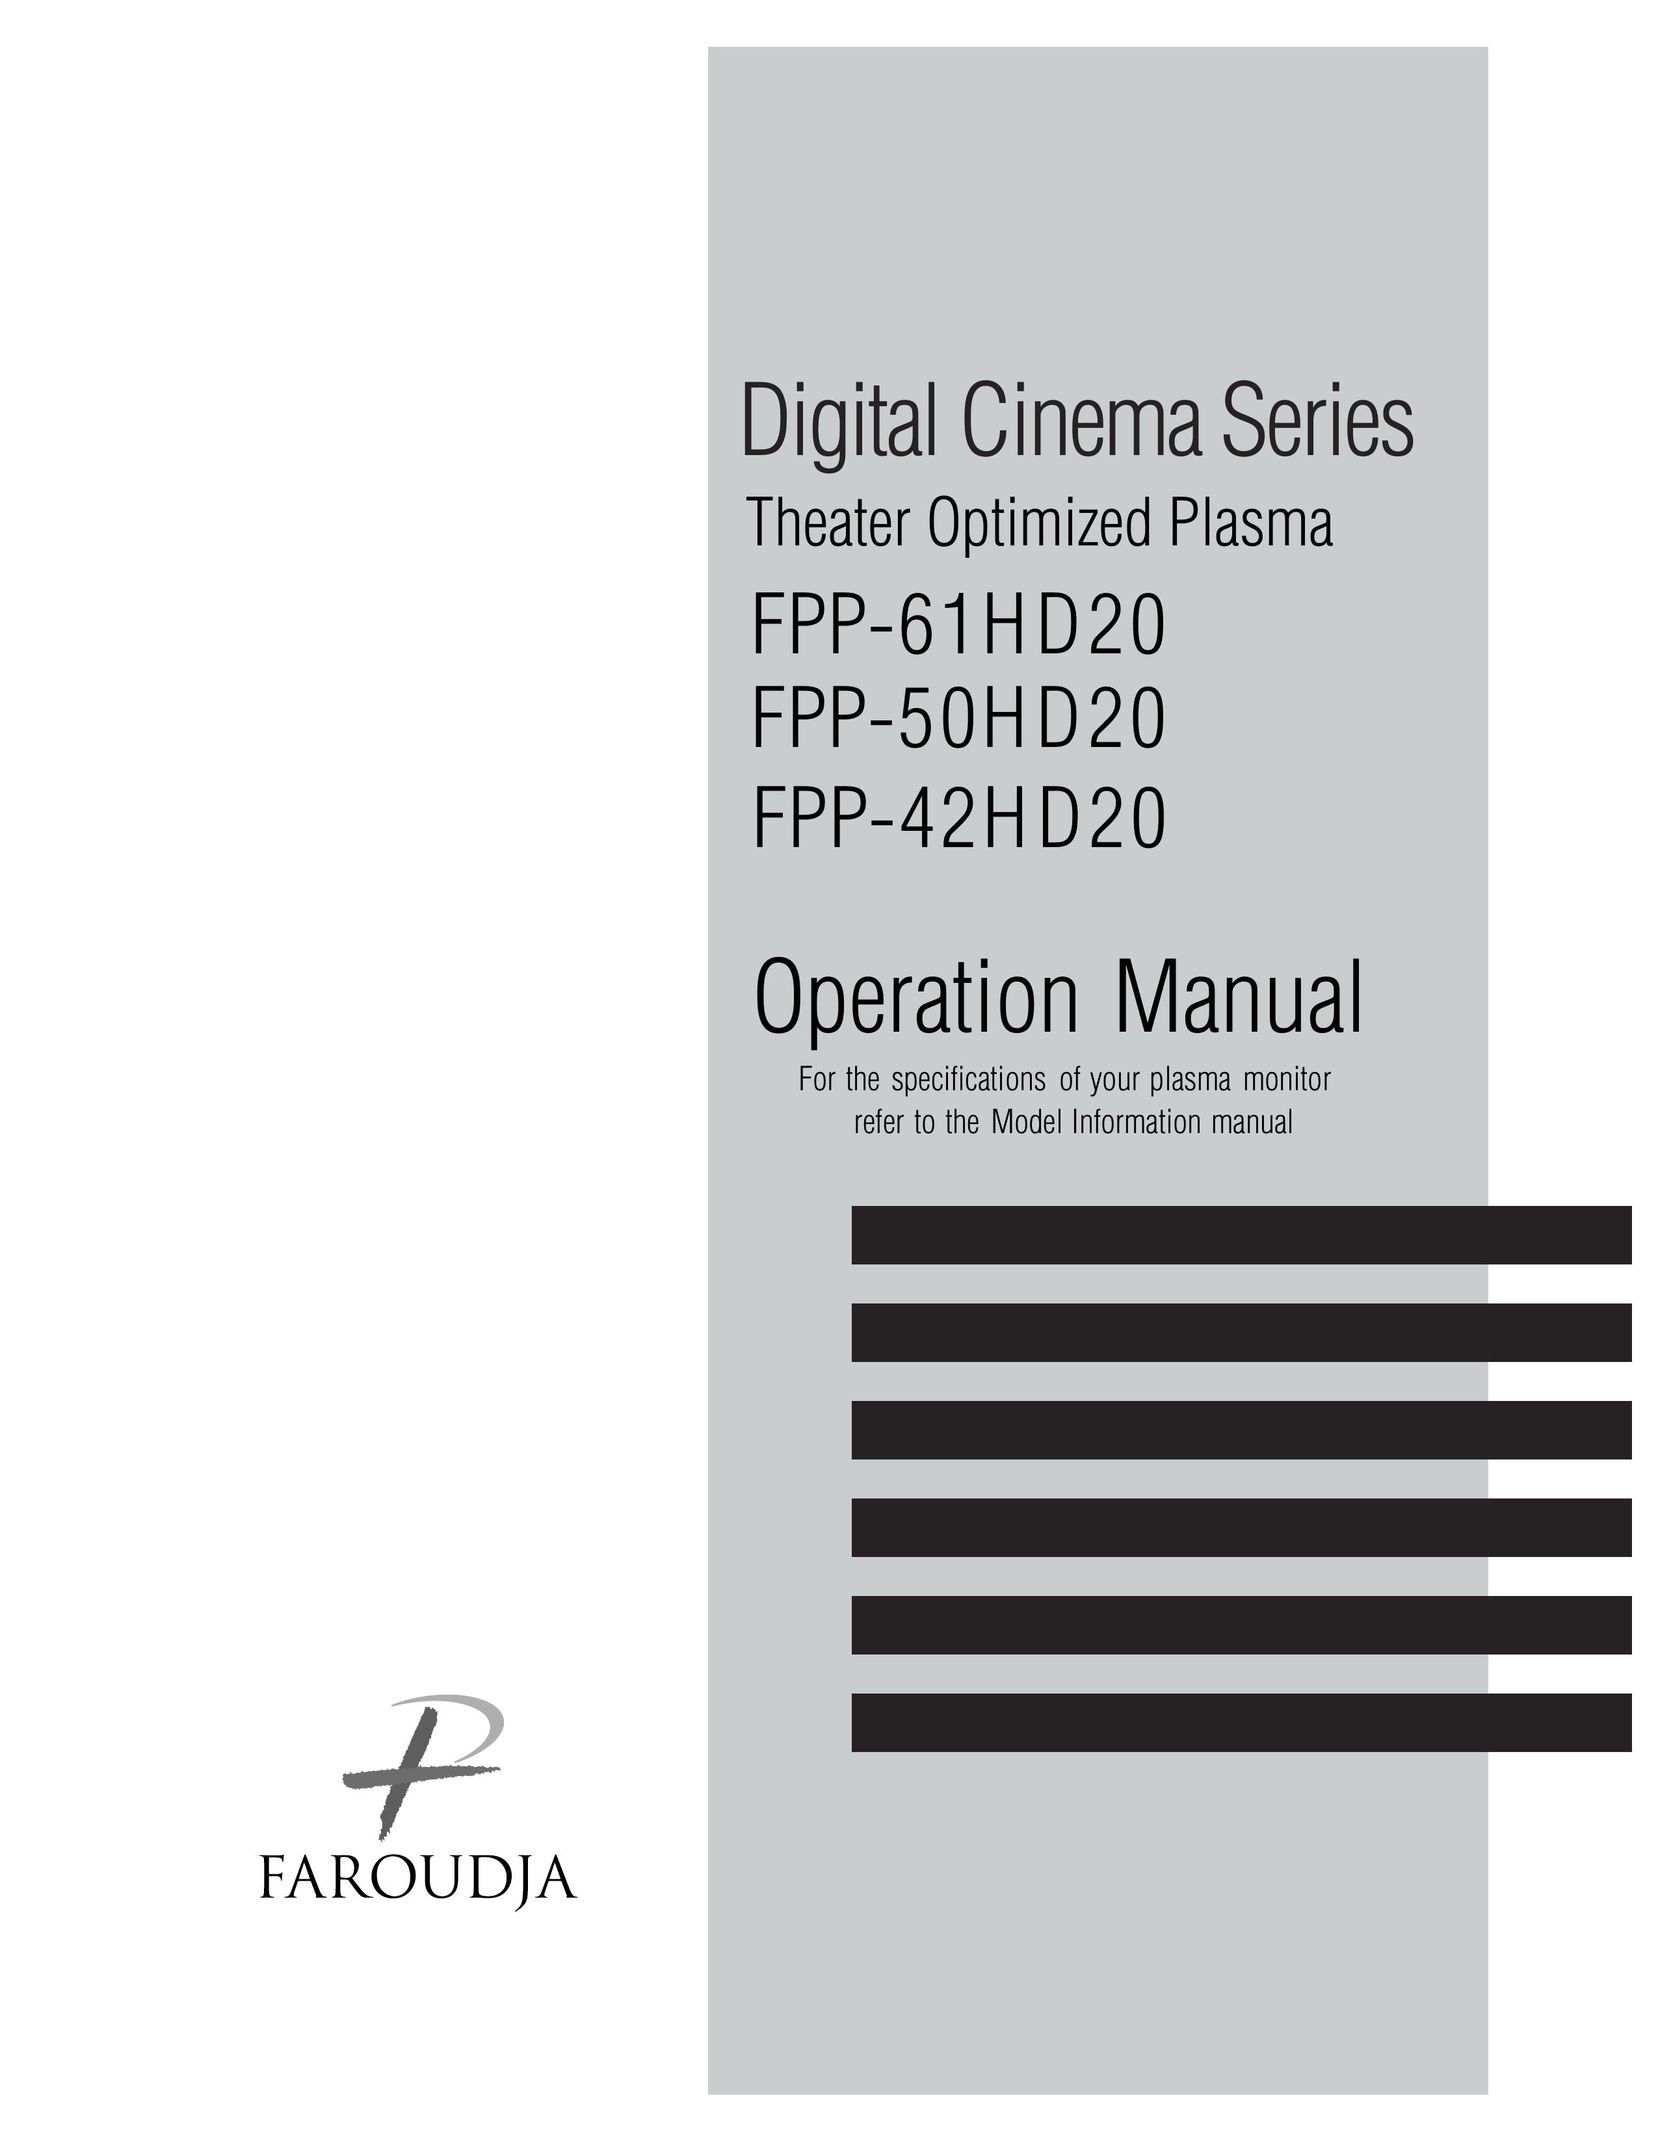 Meridian Audio FPP-61HD20 Home Theater System User Manual